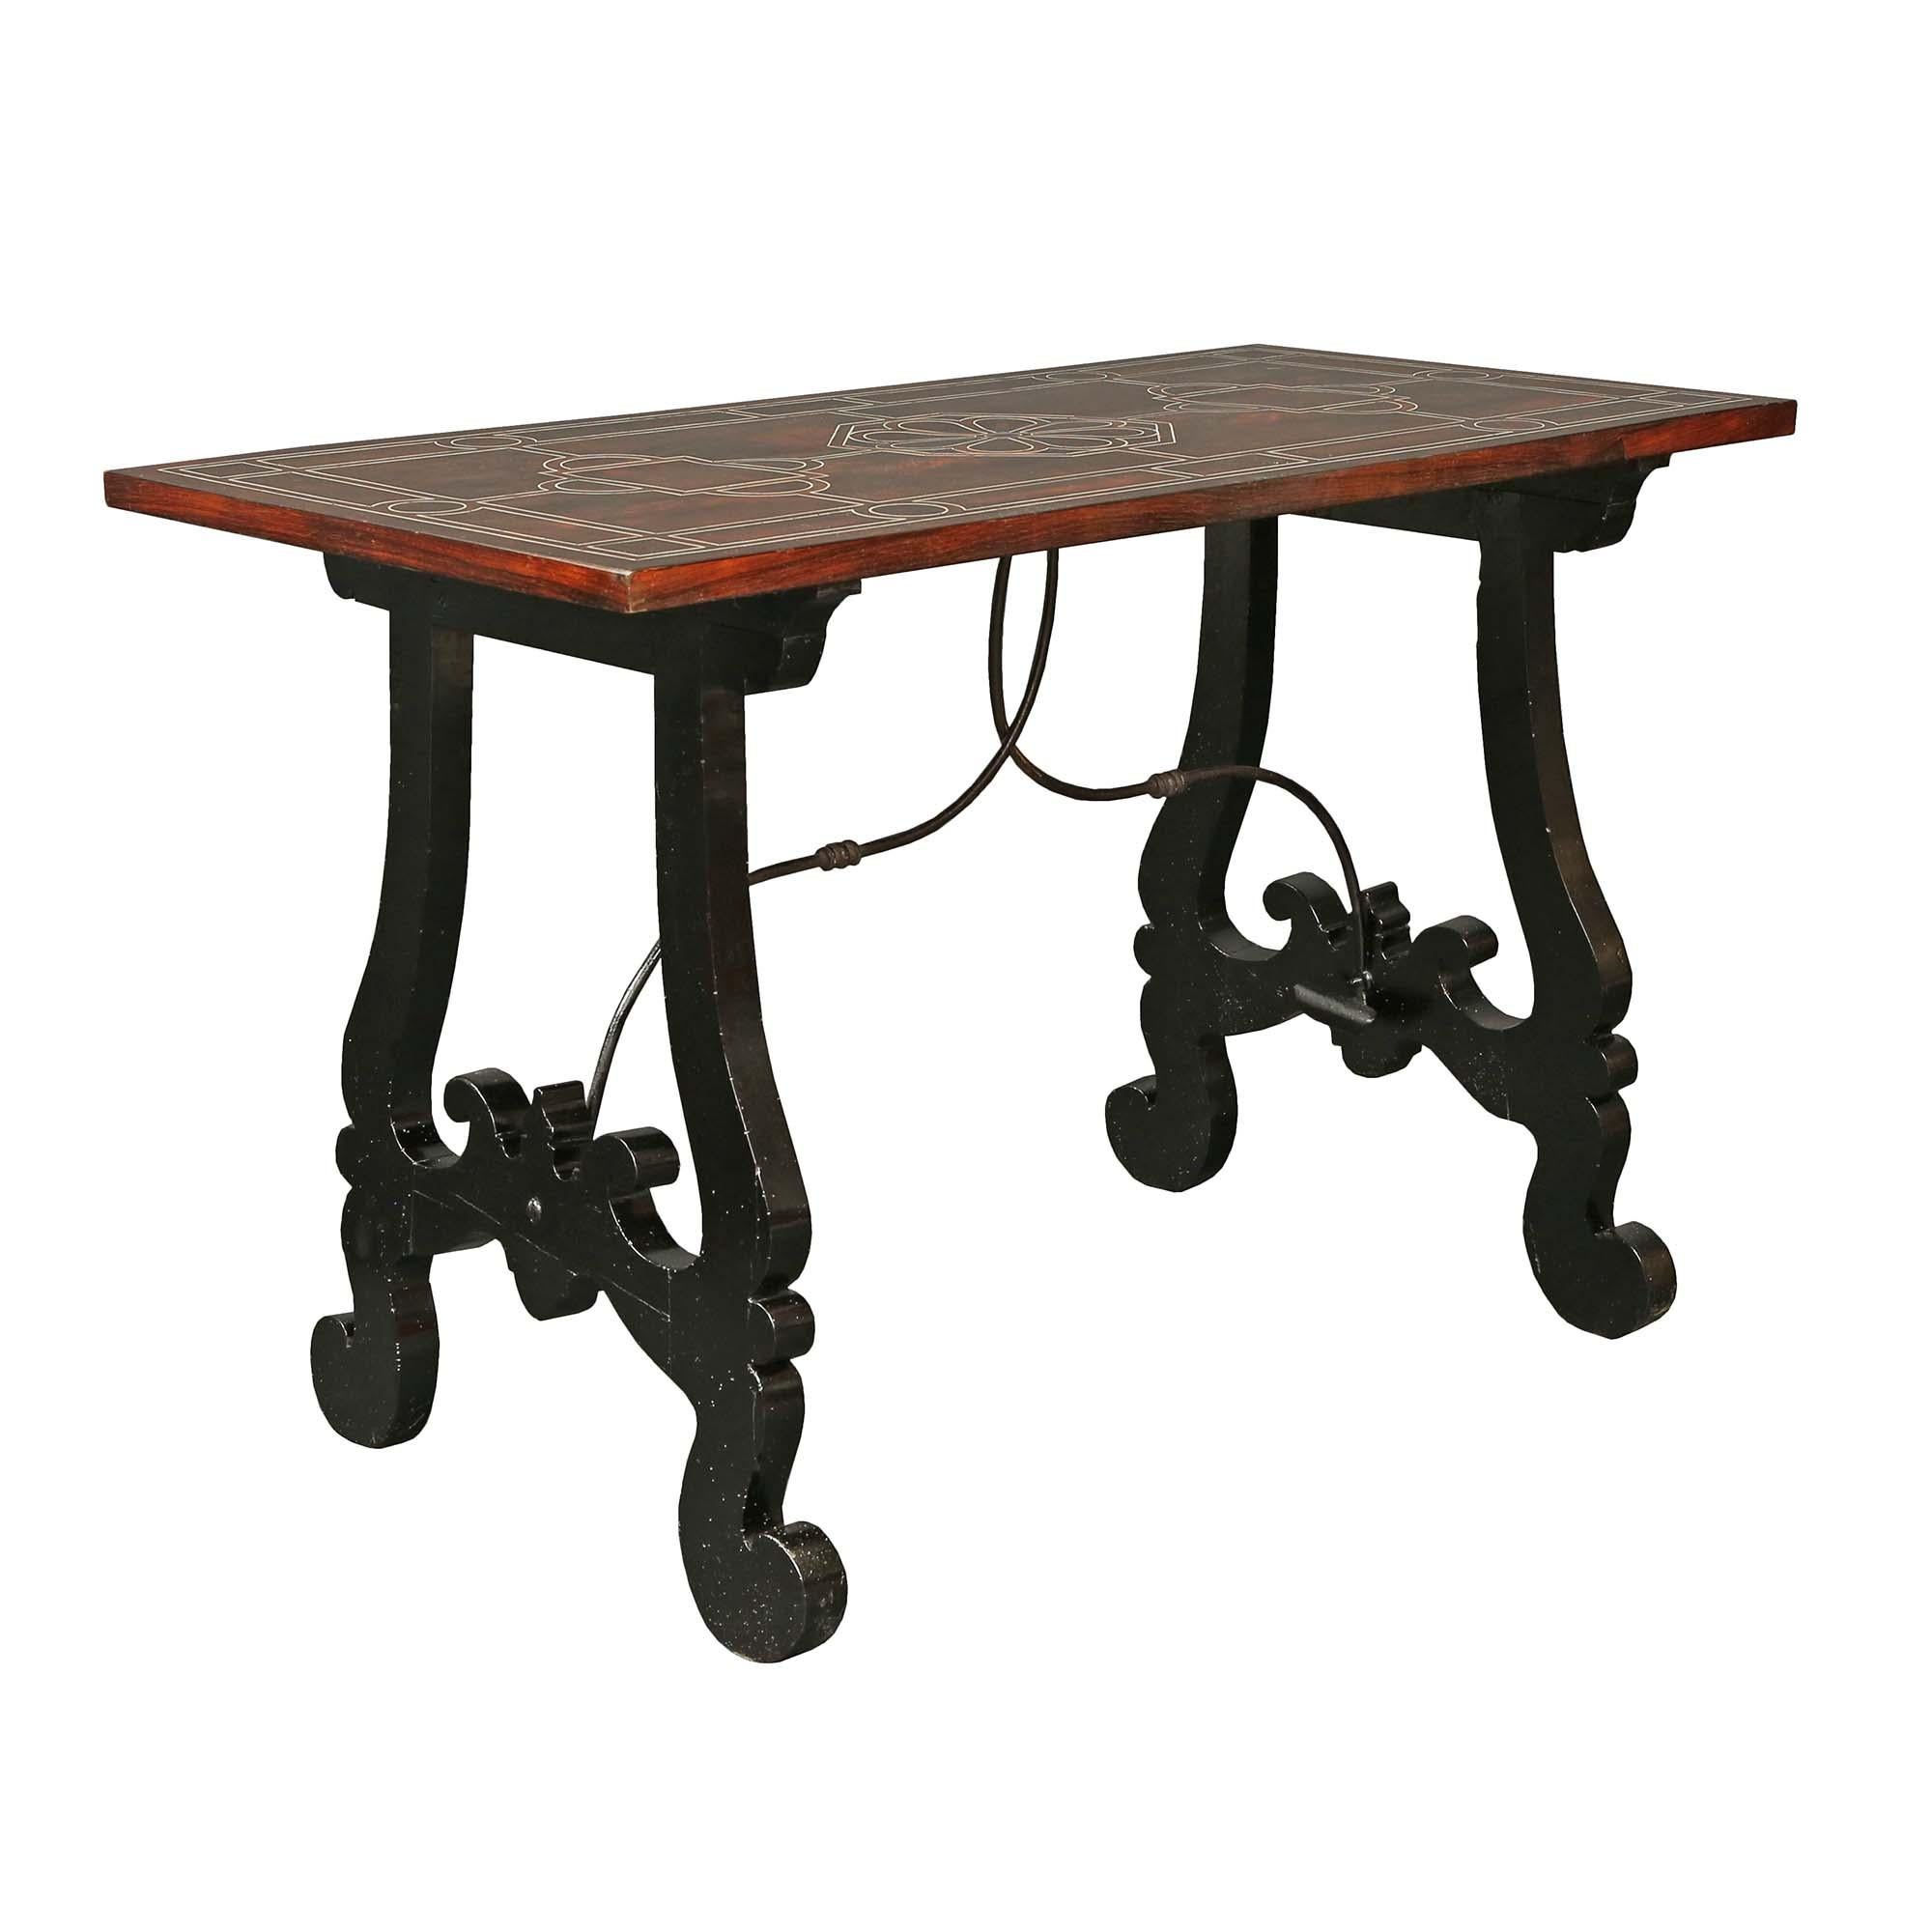 Pair of Italian 17th Century Trestle Tables from Florence In Good Condition For Sale In West Palm Beach, FL